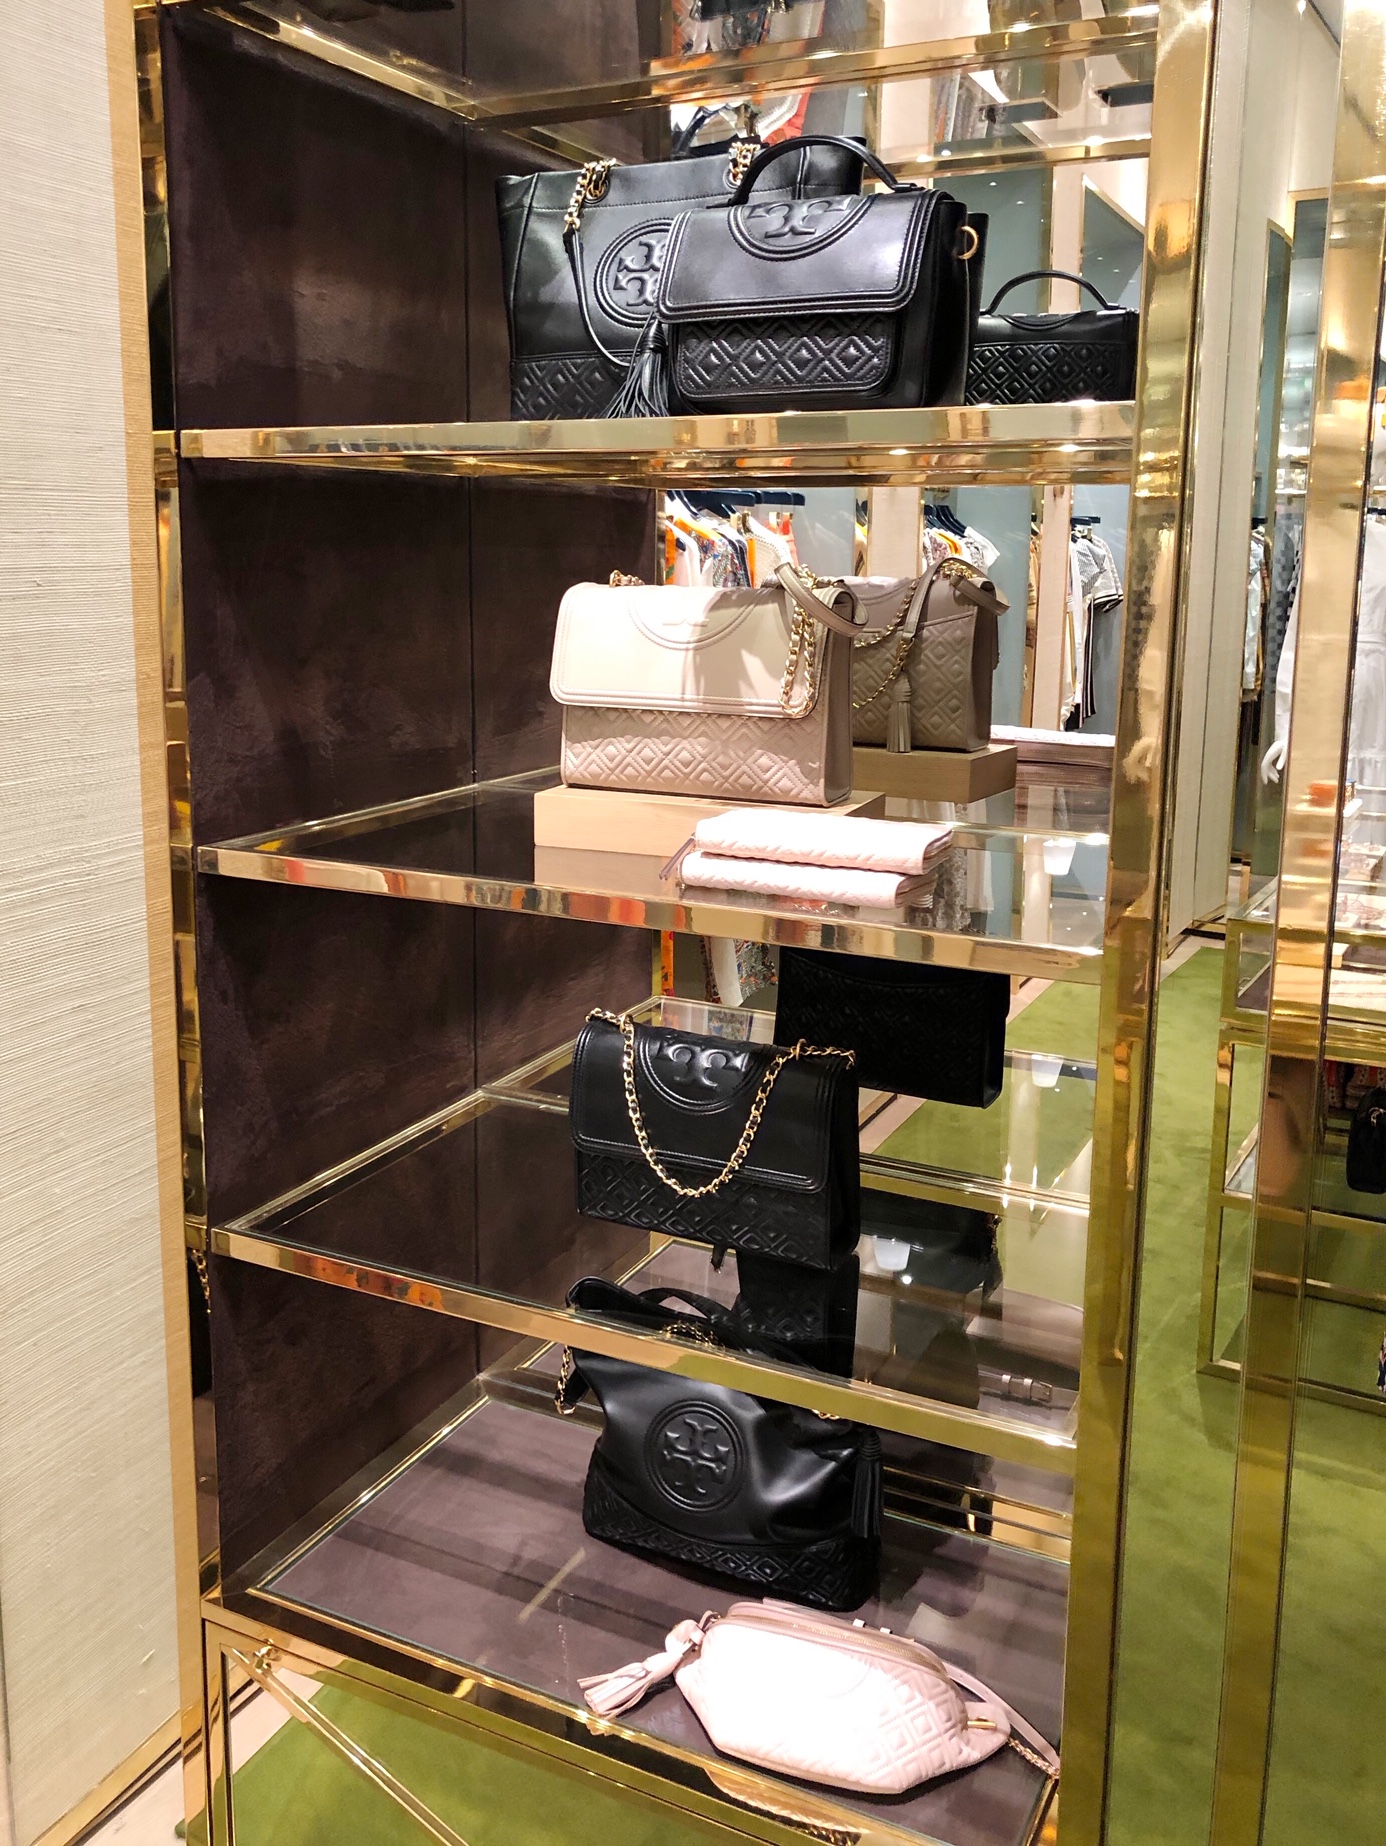 Tory Burch Spring Event 2019  Save Up To 30% Off! - The Double